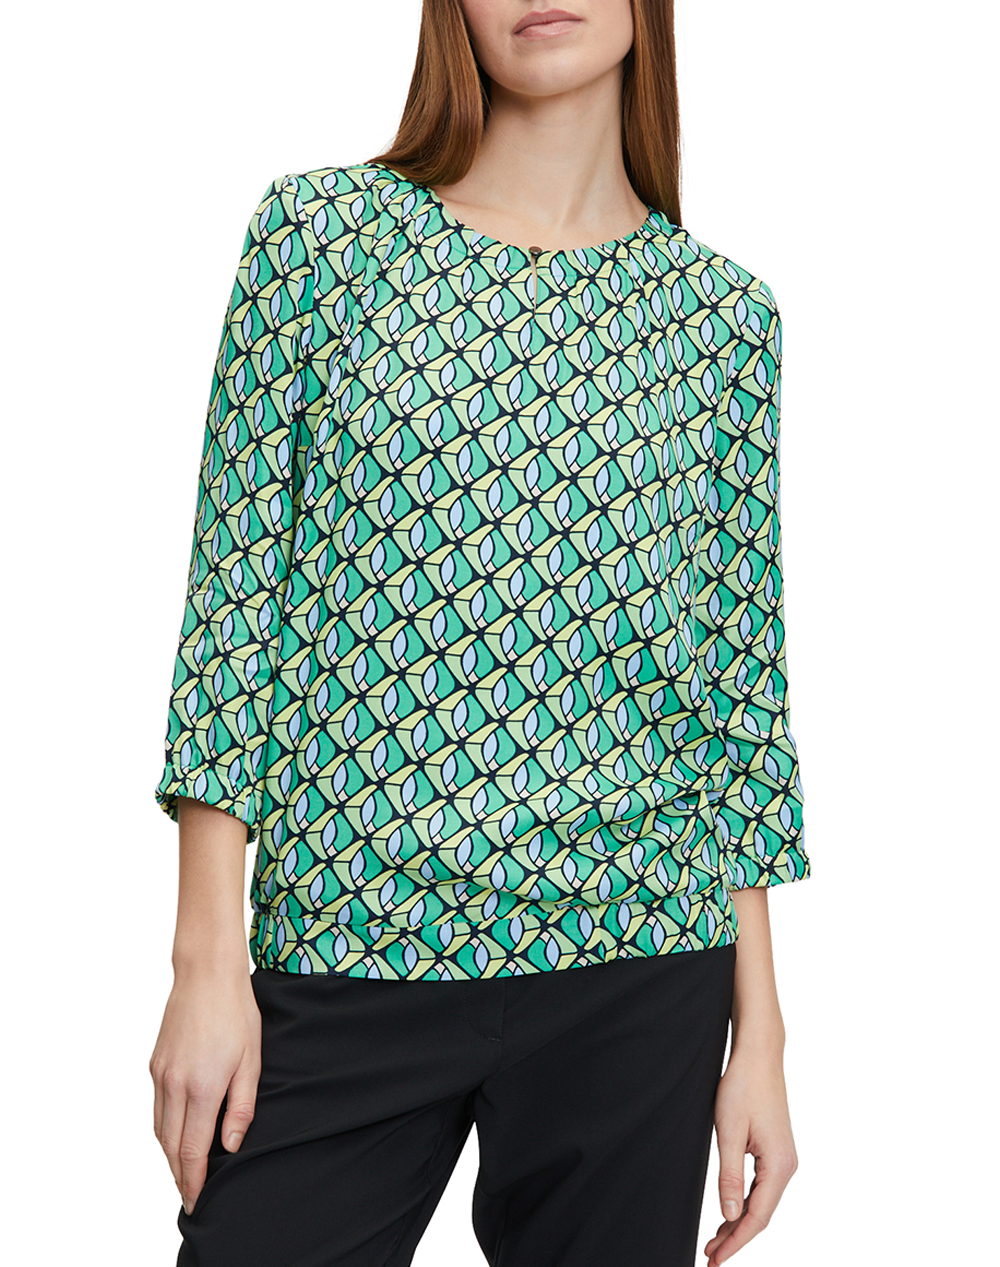 BETTY BARCLAY Bluse 8666/2501-5880 Green